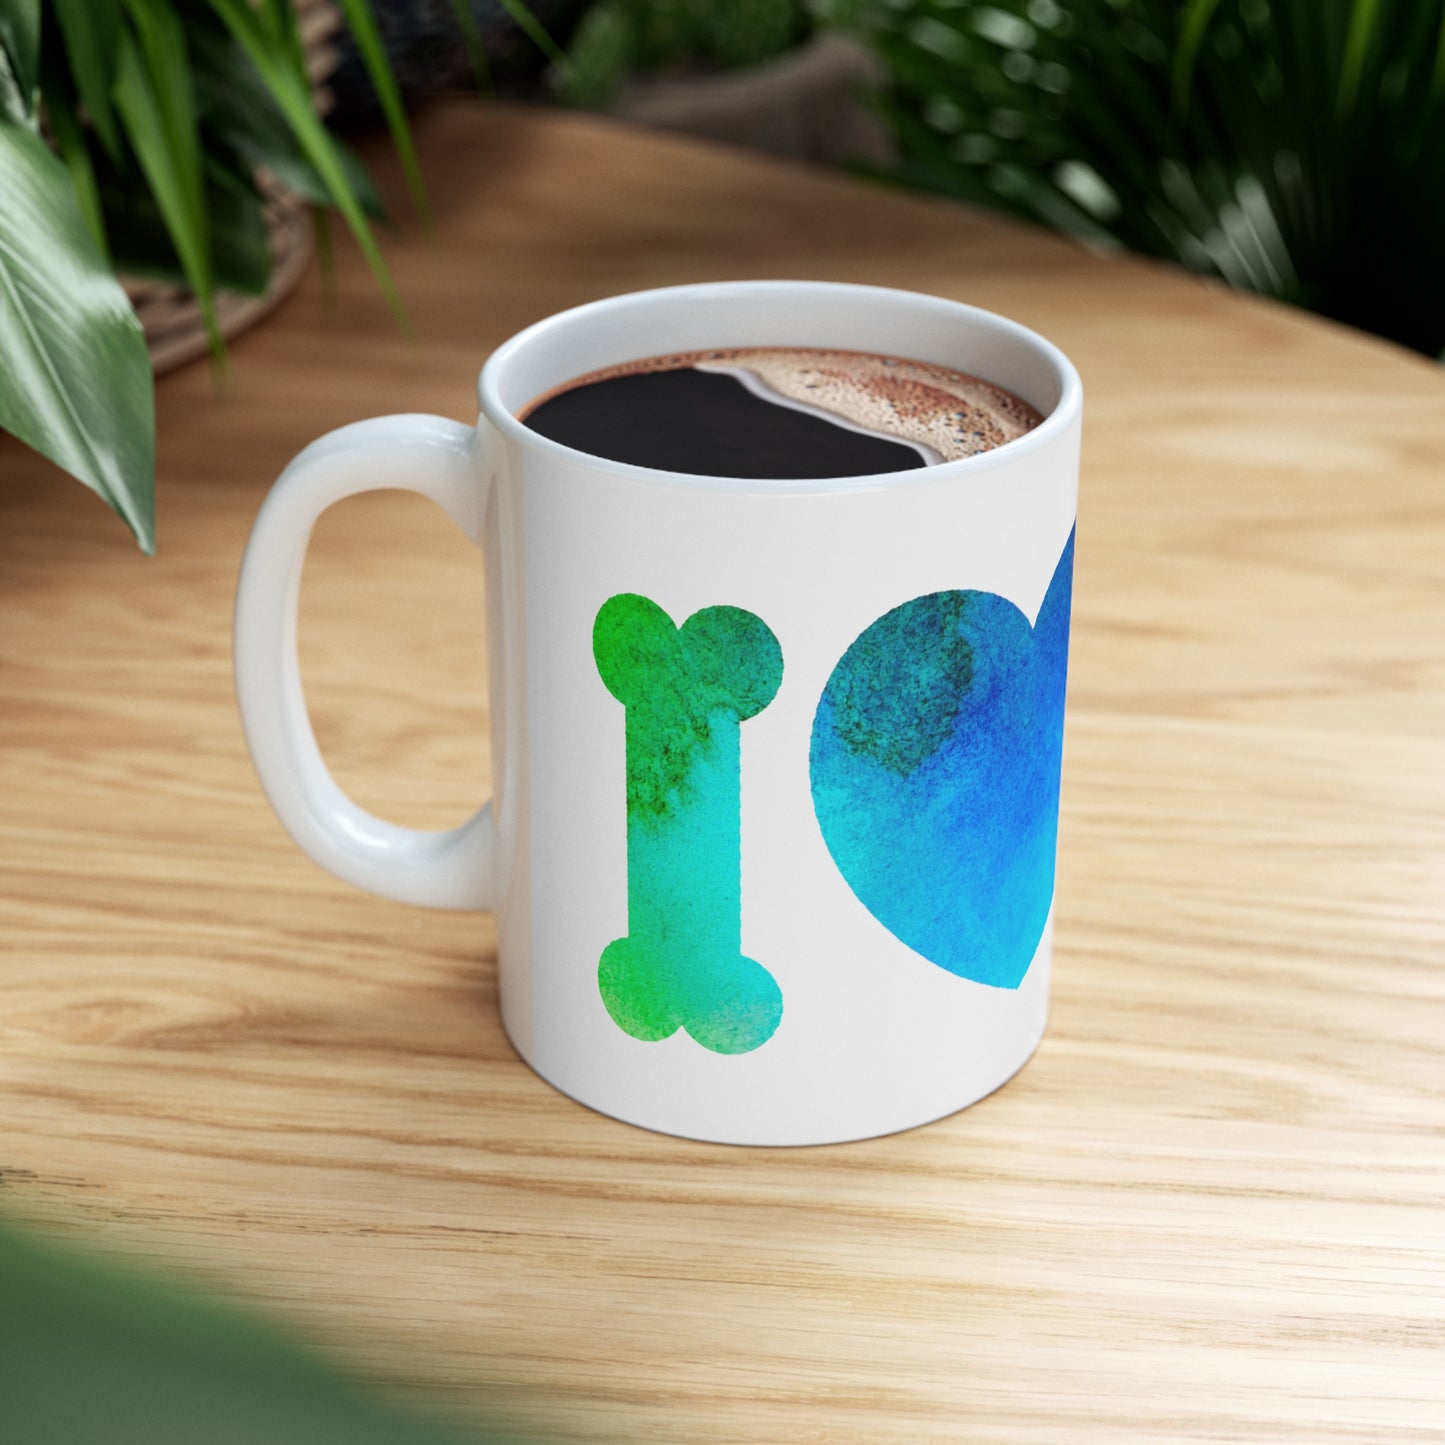 Mock up of the left side of the mug filled with a beverage and sitting on a surface